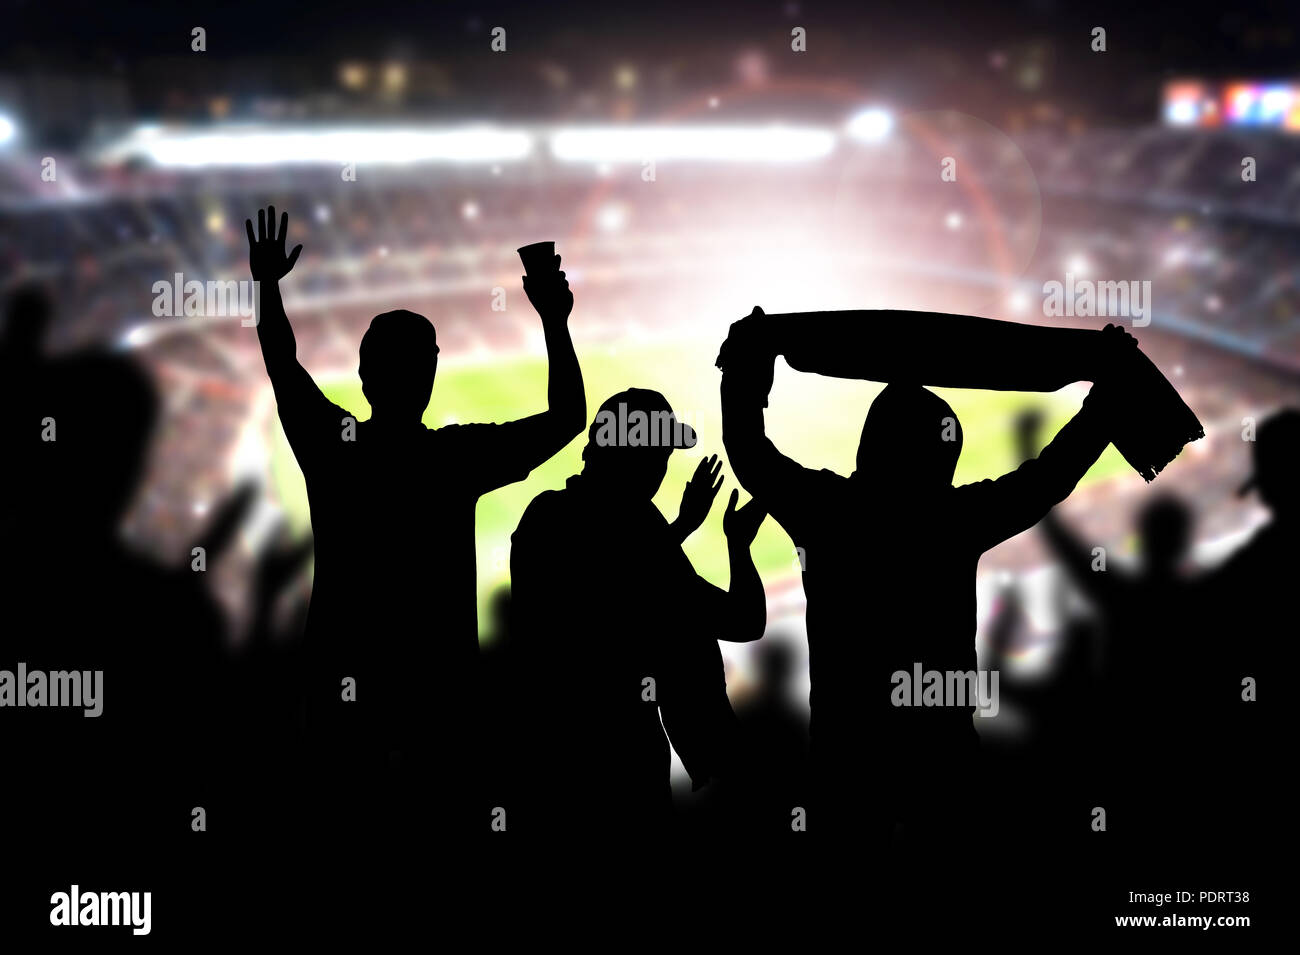 Friends at football game in soccer stadium. Crowd cheering and celebrating a goal in arena during match. Silhouette people in live sport audience. Stock Photo